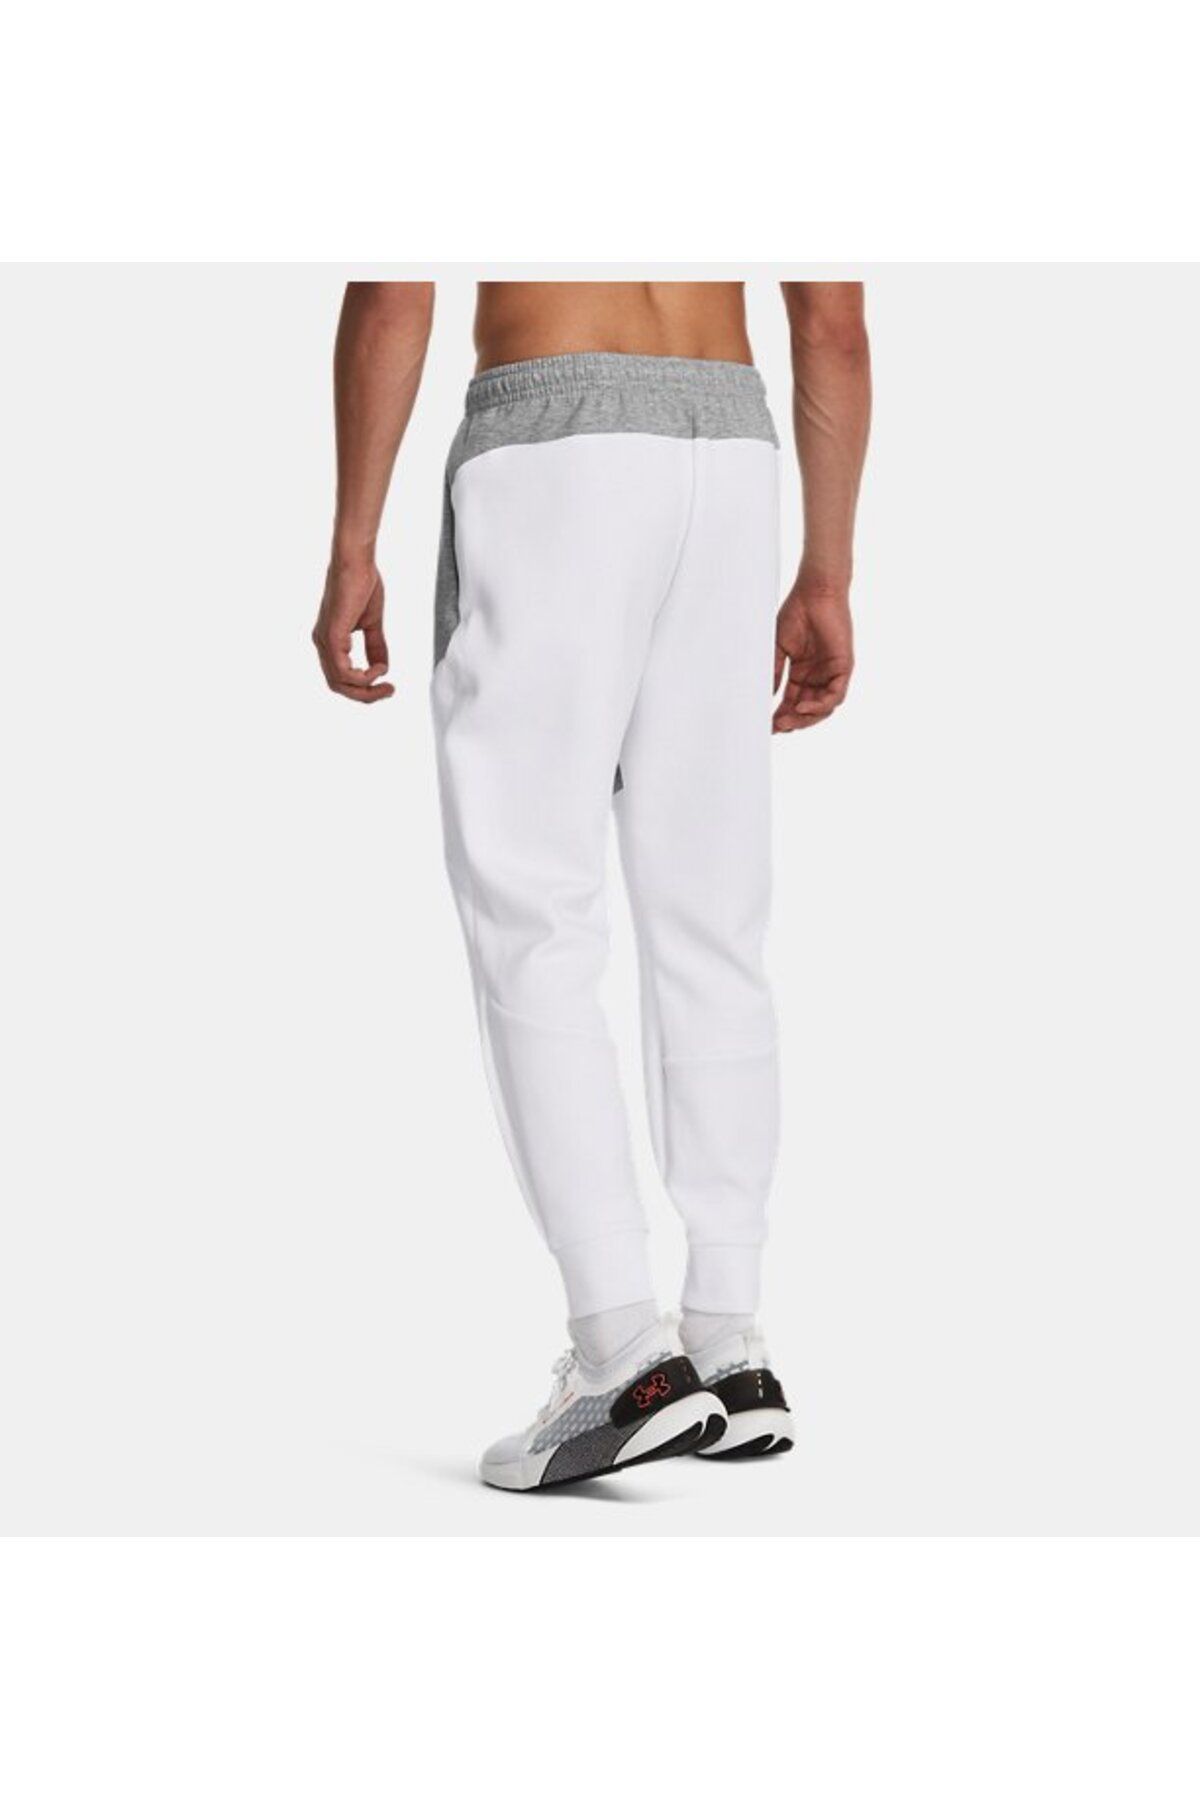 Under Armor Unstoppable Fleece Joggers - 1379808-012